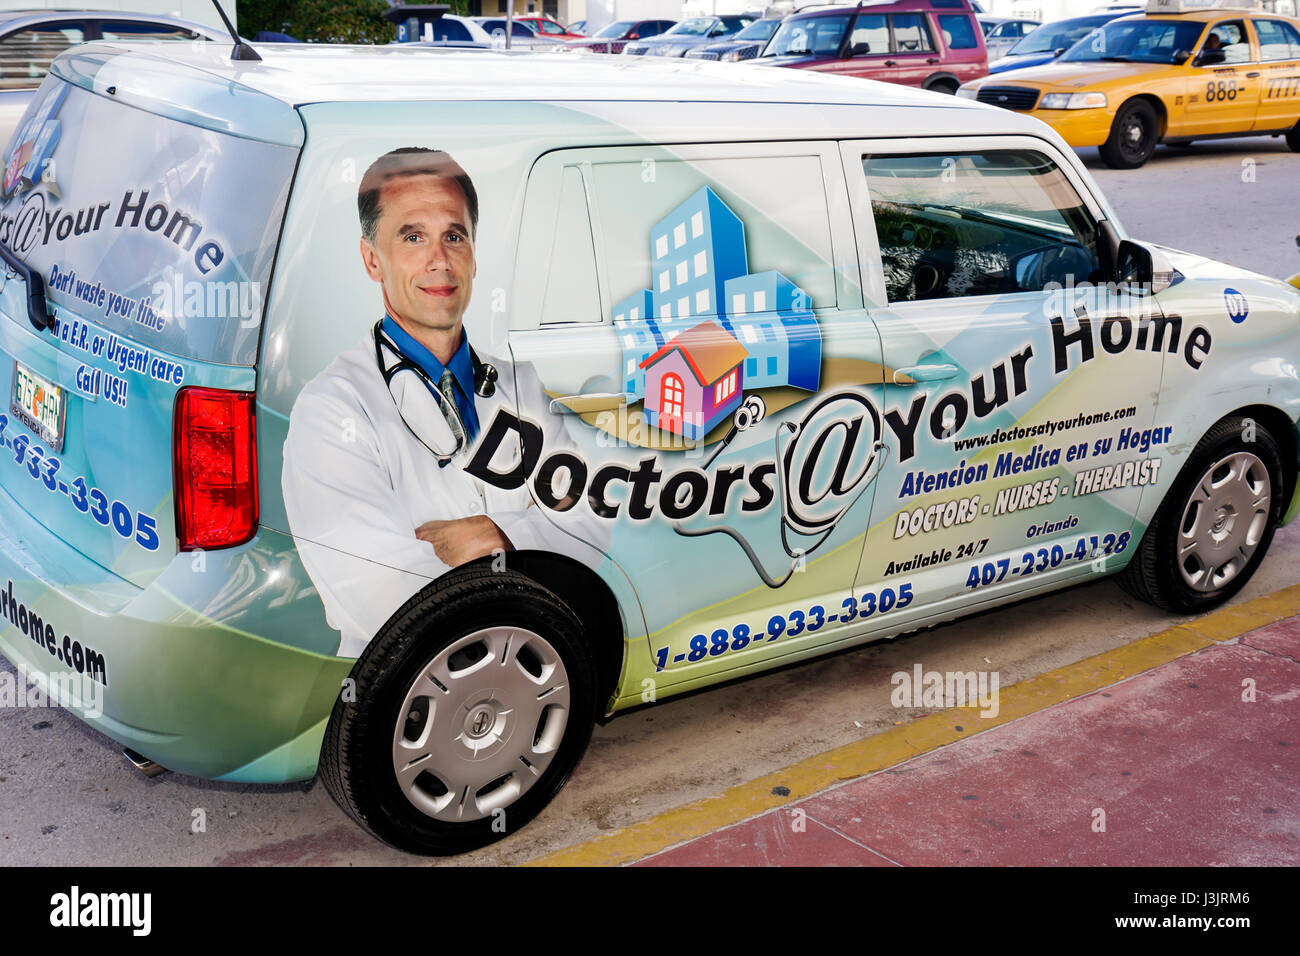 Miami Beach Florida,Ocean Drive,van,ad,advertising,ad,healthcare,Doctors at @ Your Home,health care,physician house call,medical visit,ad,advertising, Stock Photo